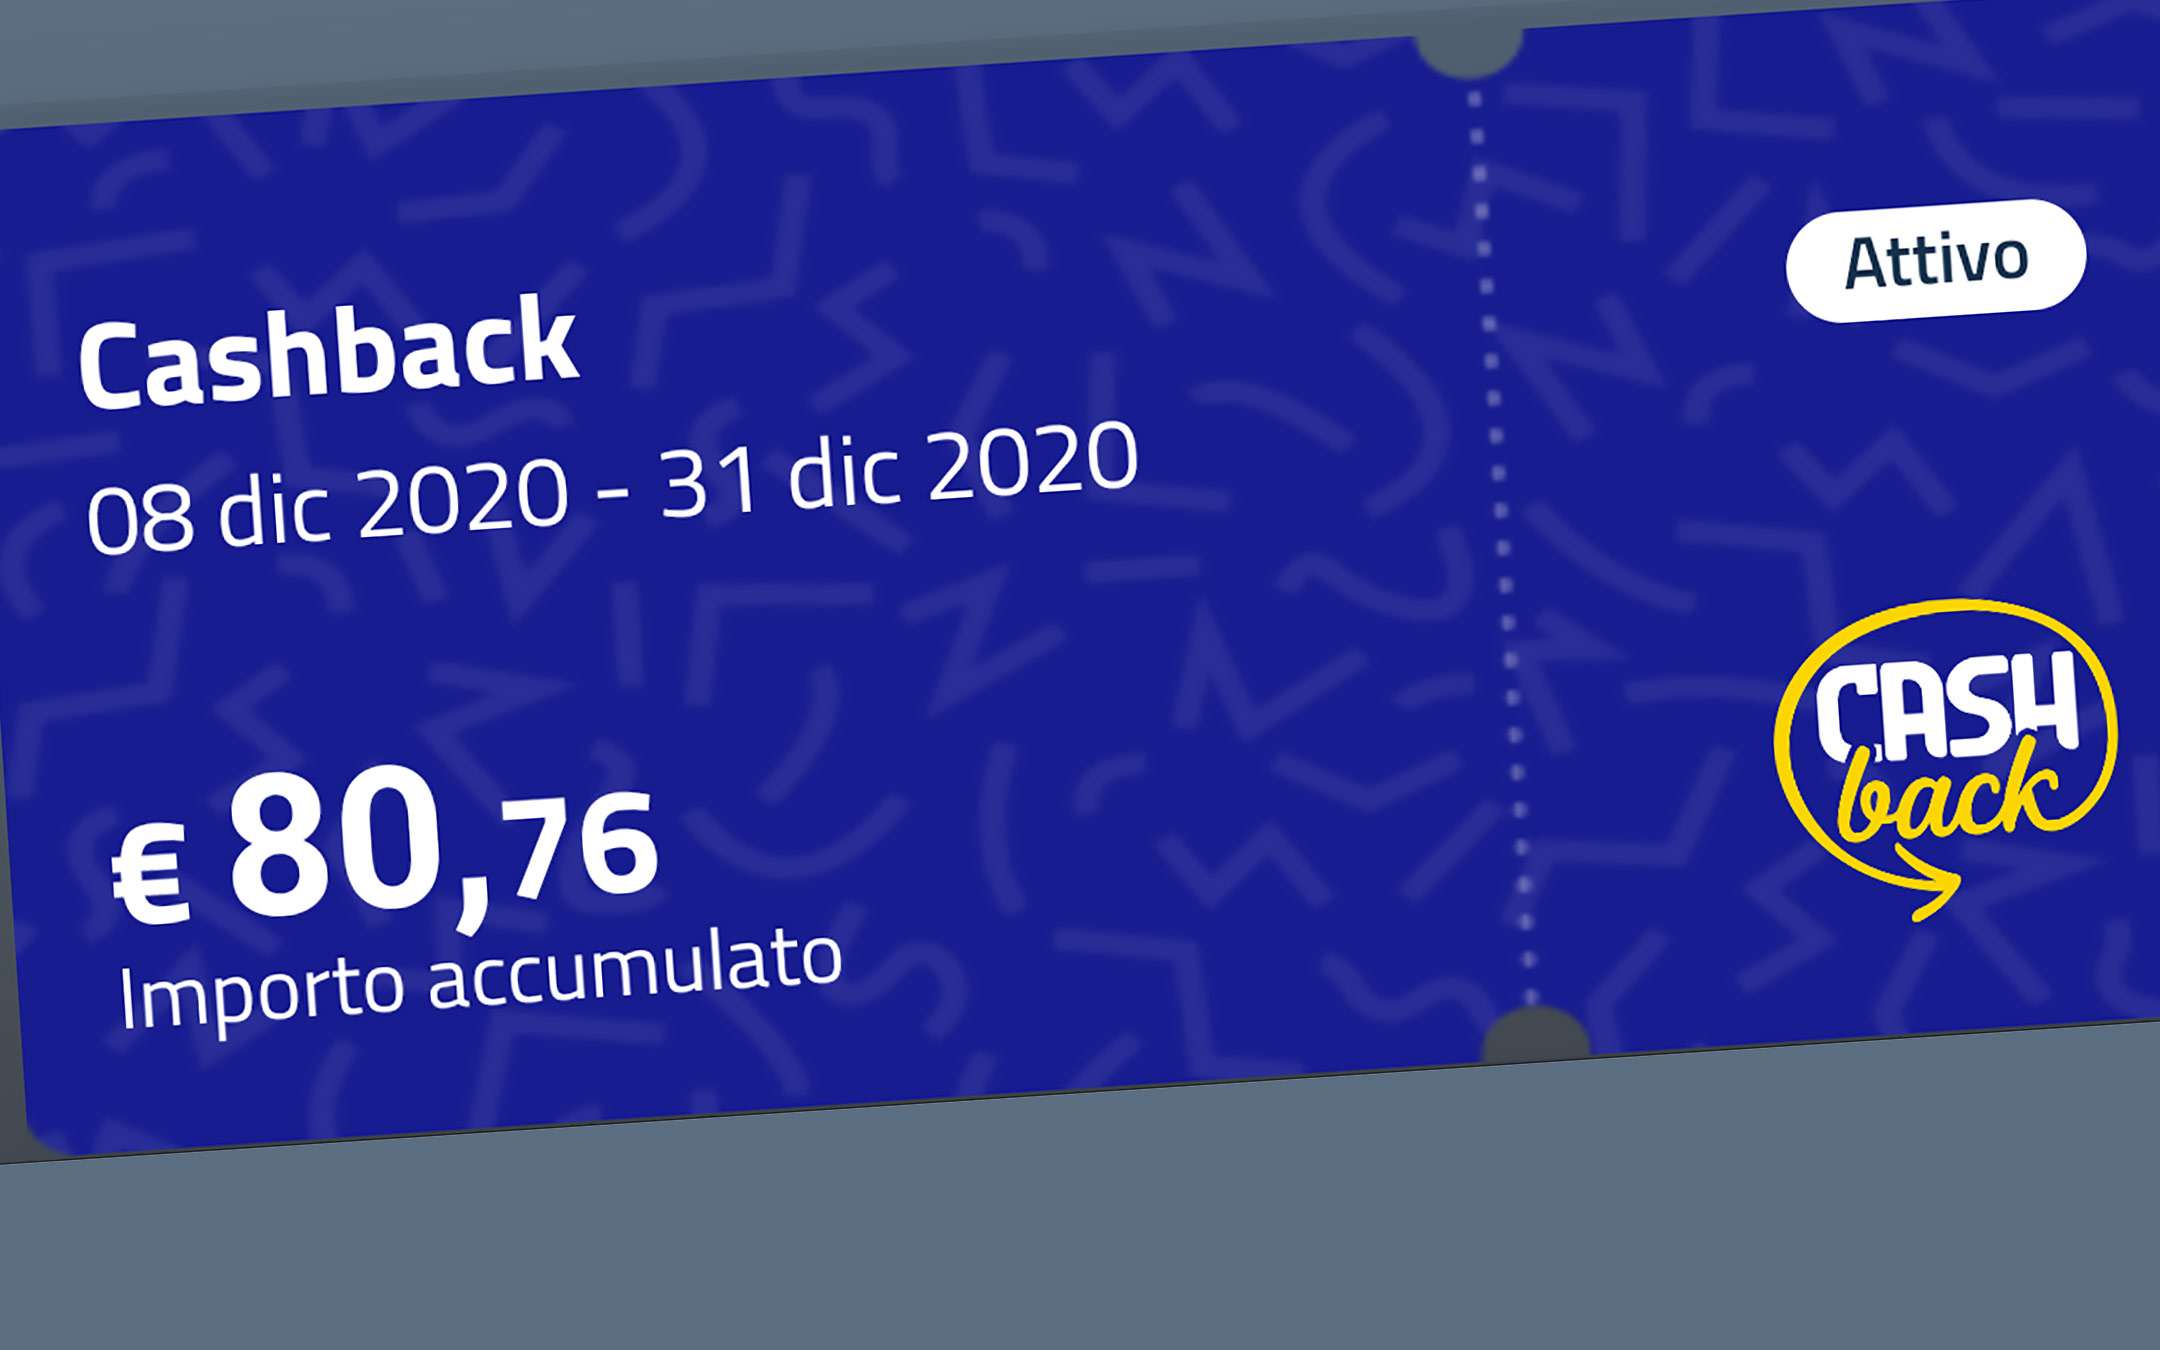 Cashback: rest assured, there are funds for everyone